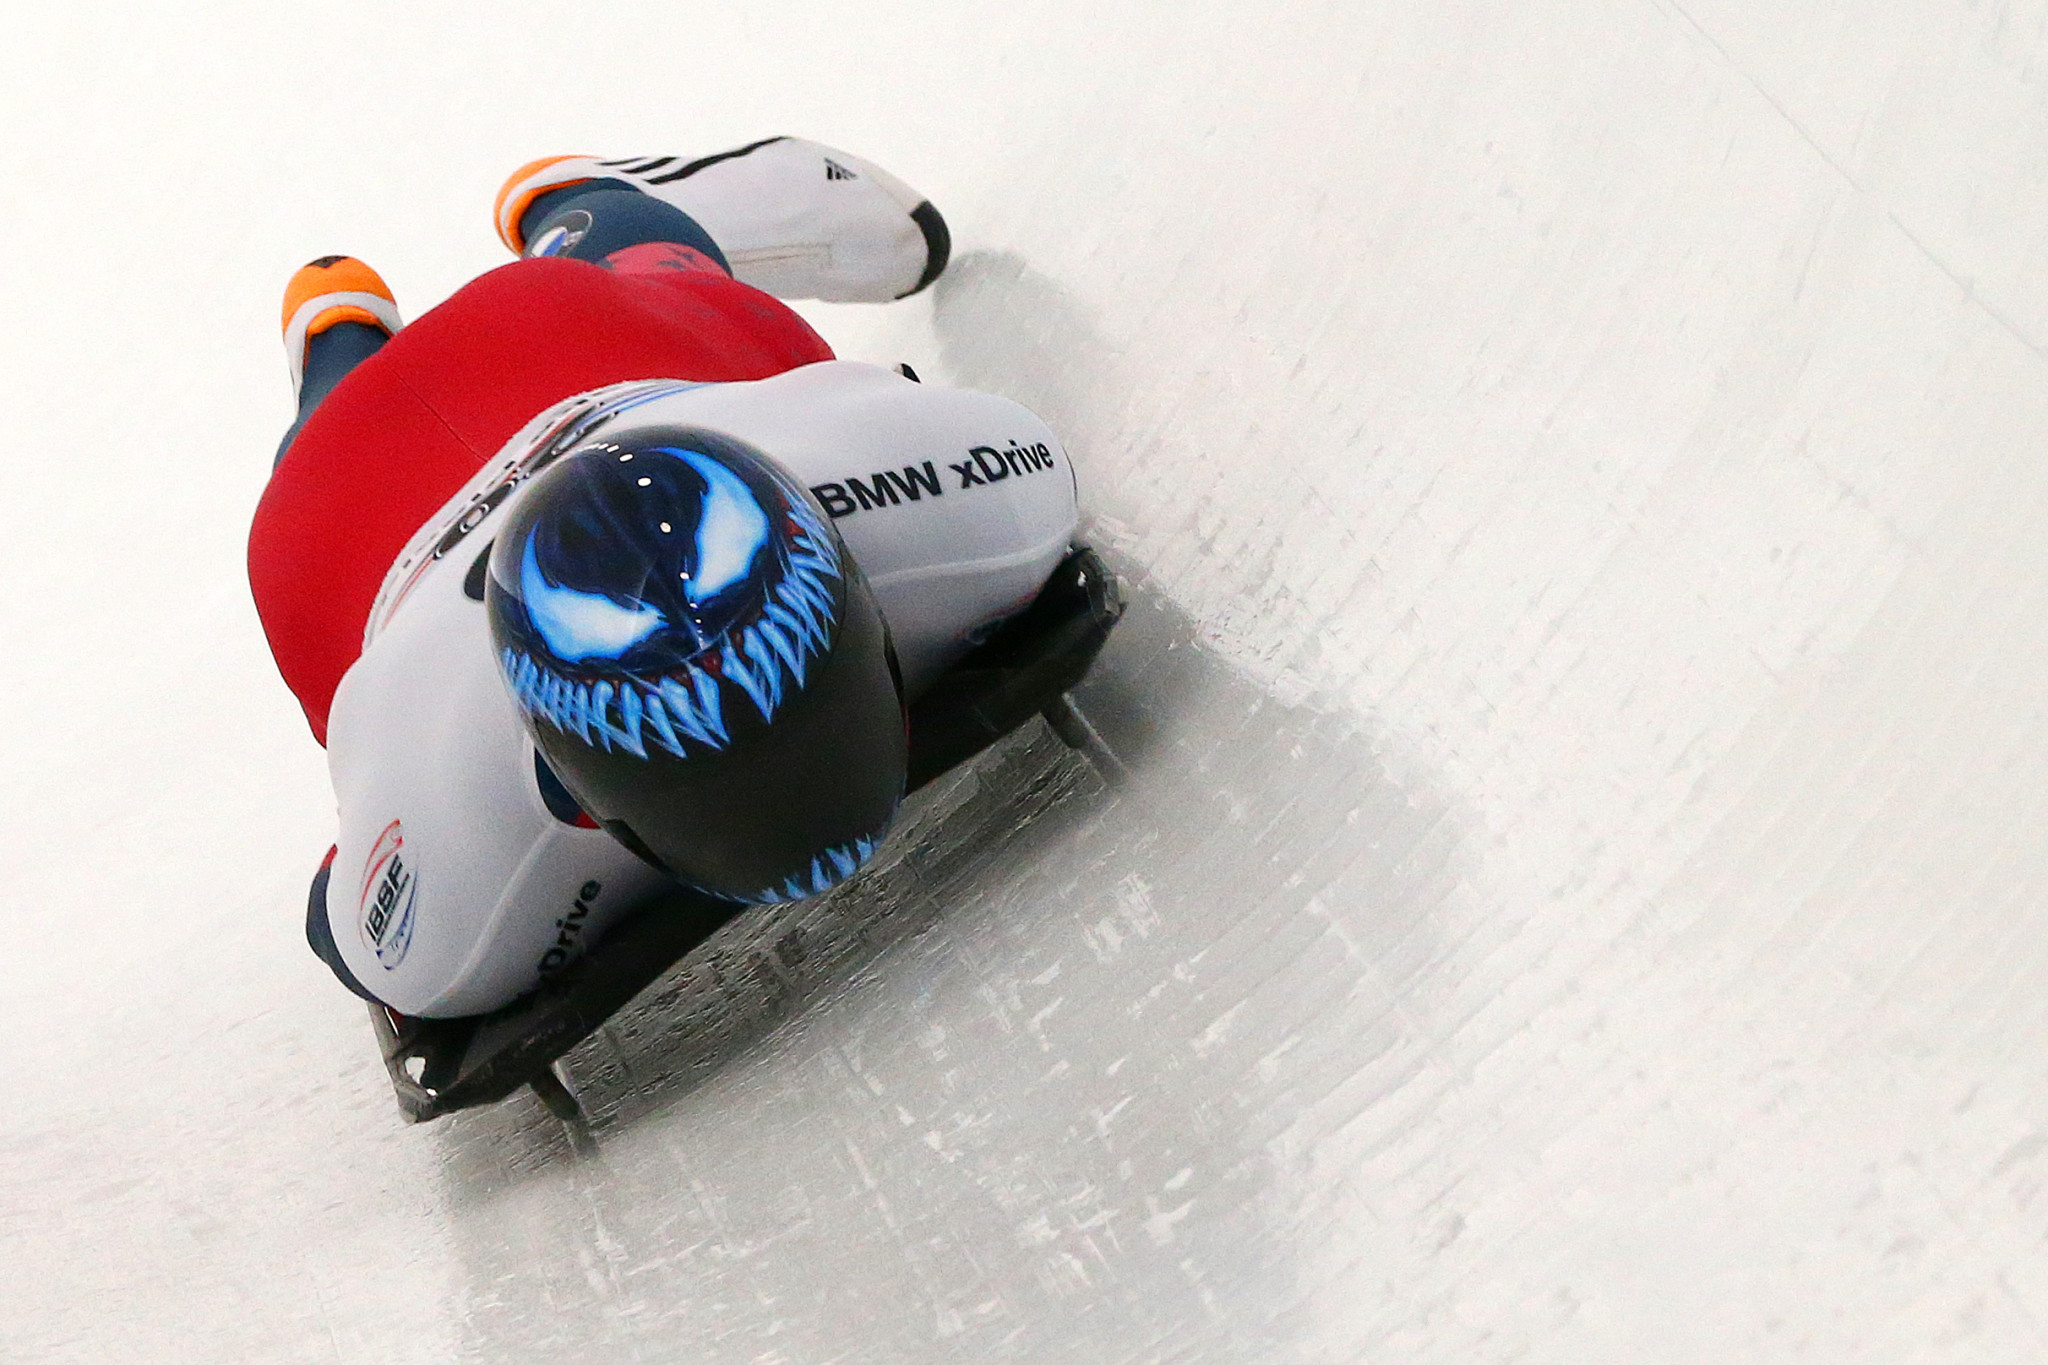 Austin Florian enjoyed an impressive season at World Cup level and was voted the "most valuable player" by USA Bobsled and Skeleton©Getty Images